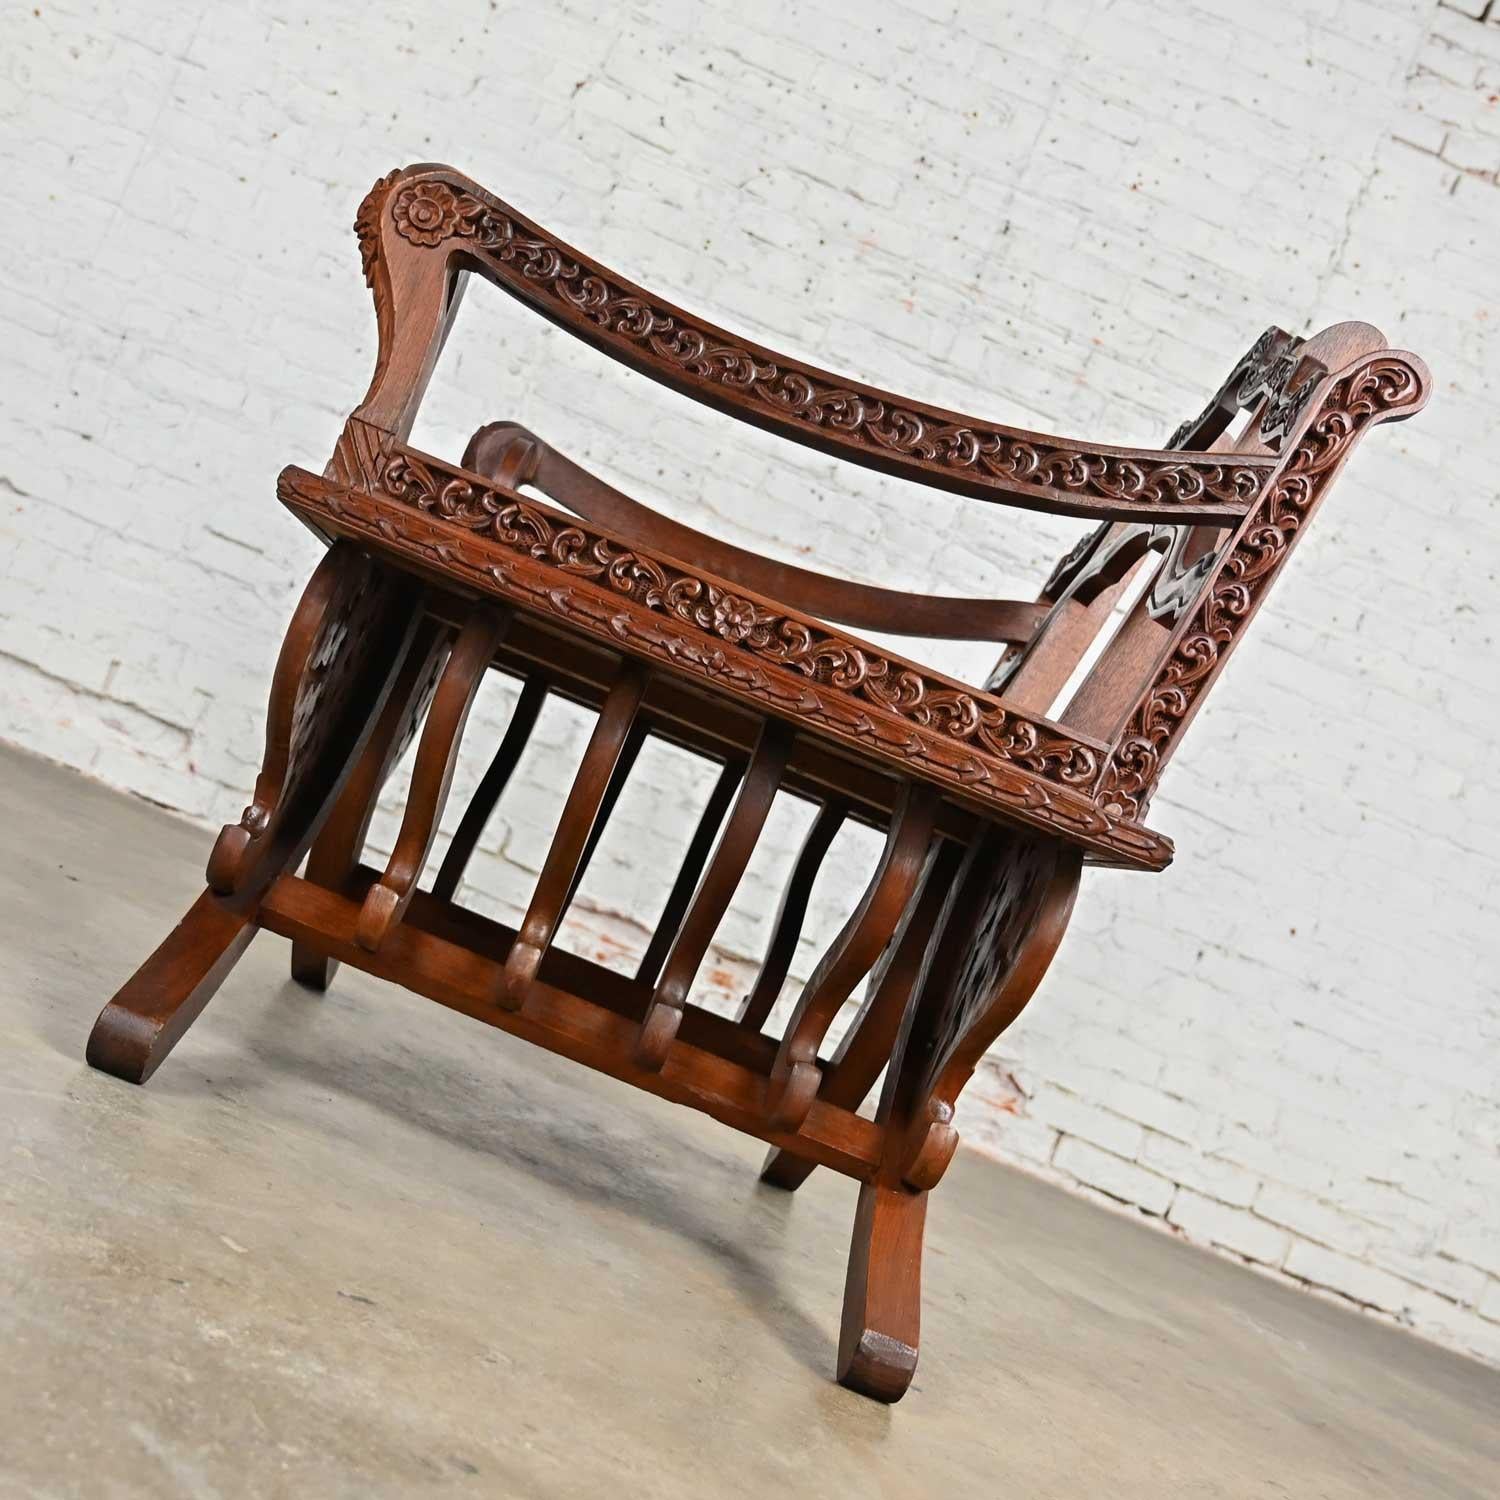 Chinoiserie Hand Carved Rosewood Howdah Elephant Saddle Chair Bangkok Thailand For Sale 1